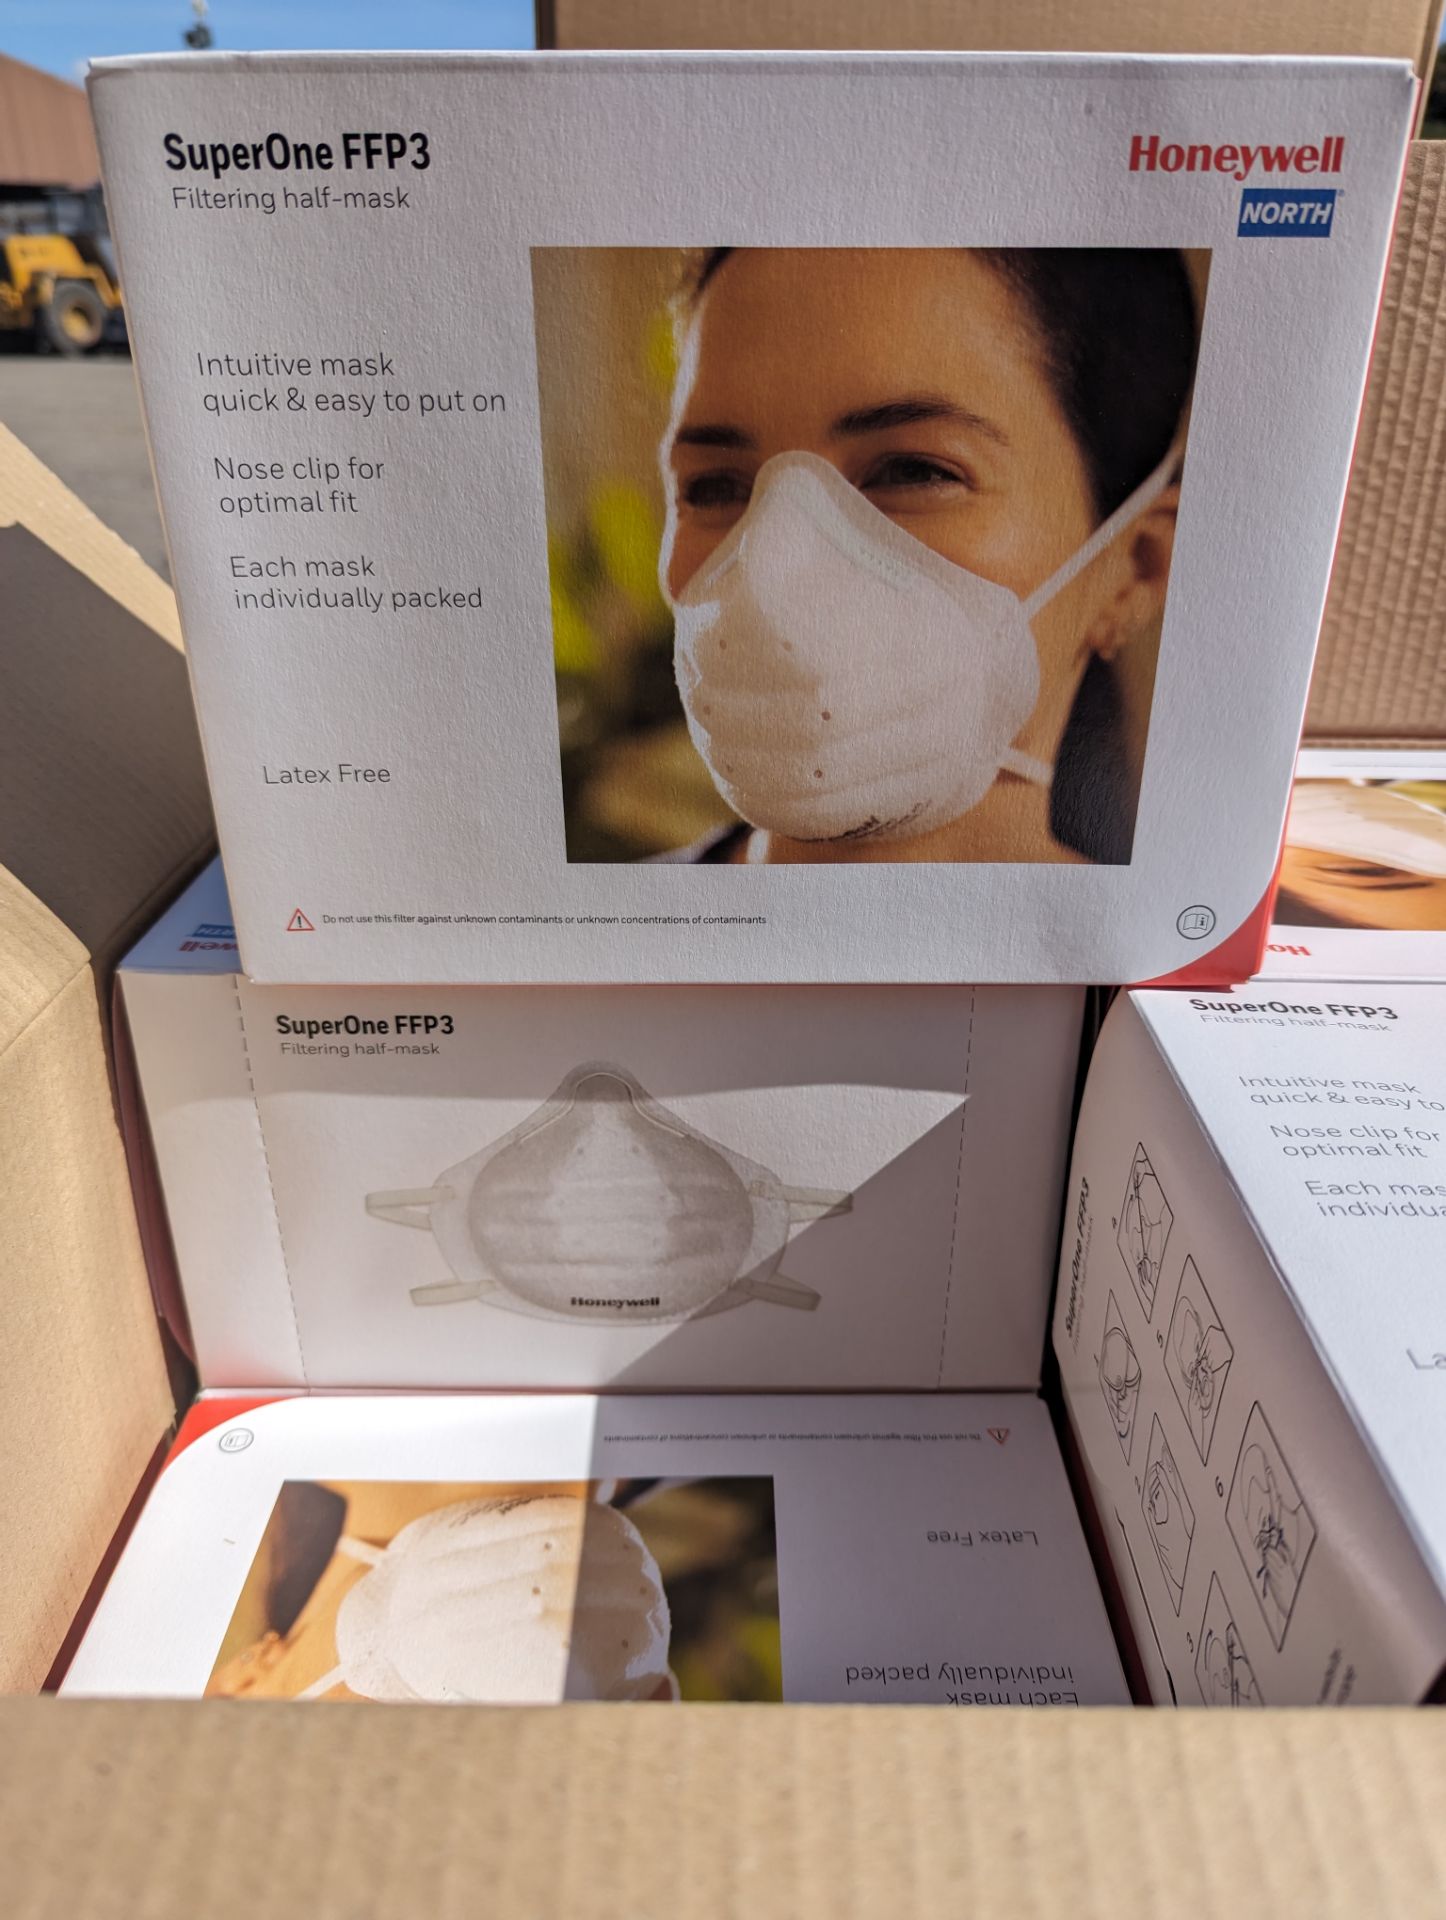 4x Boxes Honeywell SuperOne V2 ip2 FFP3 Half Mask Filter, Box of 12 Packs of 16